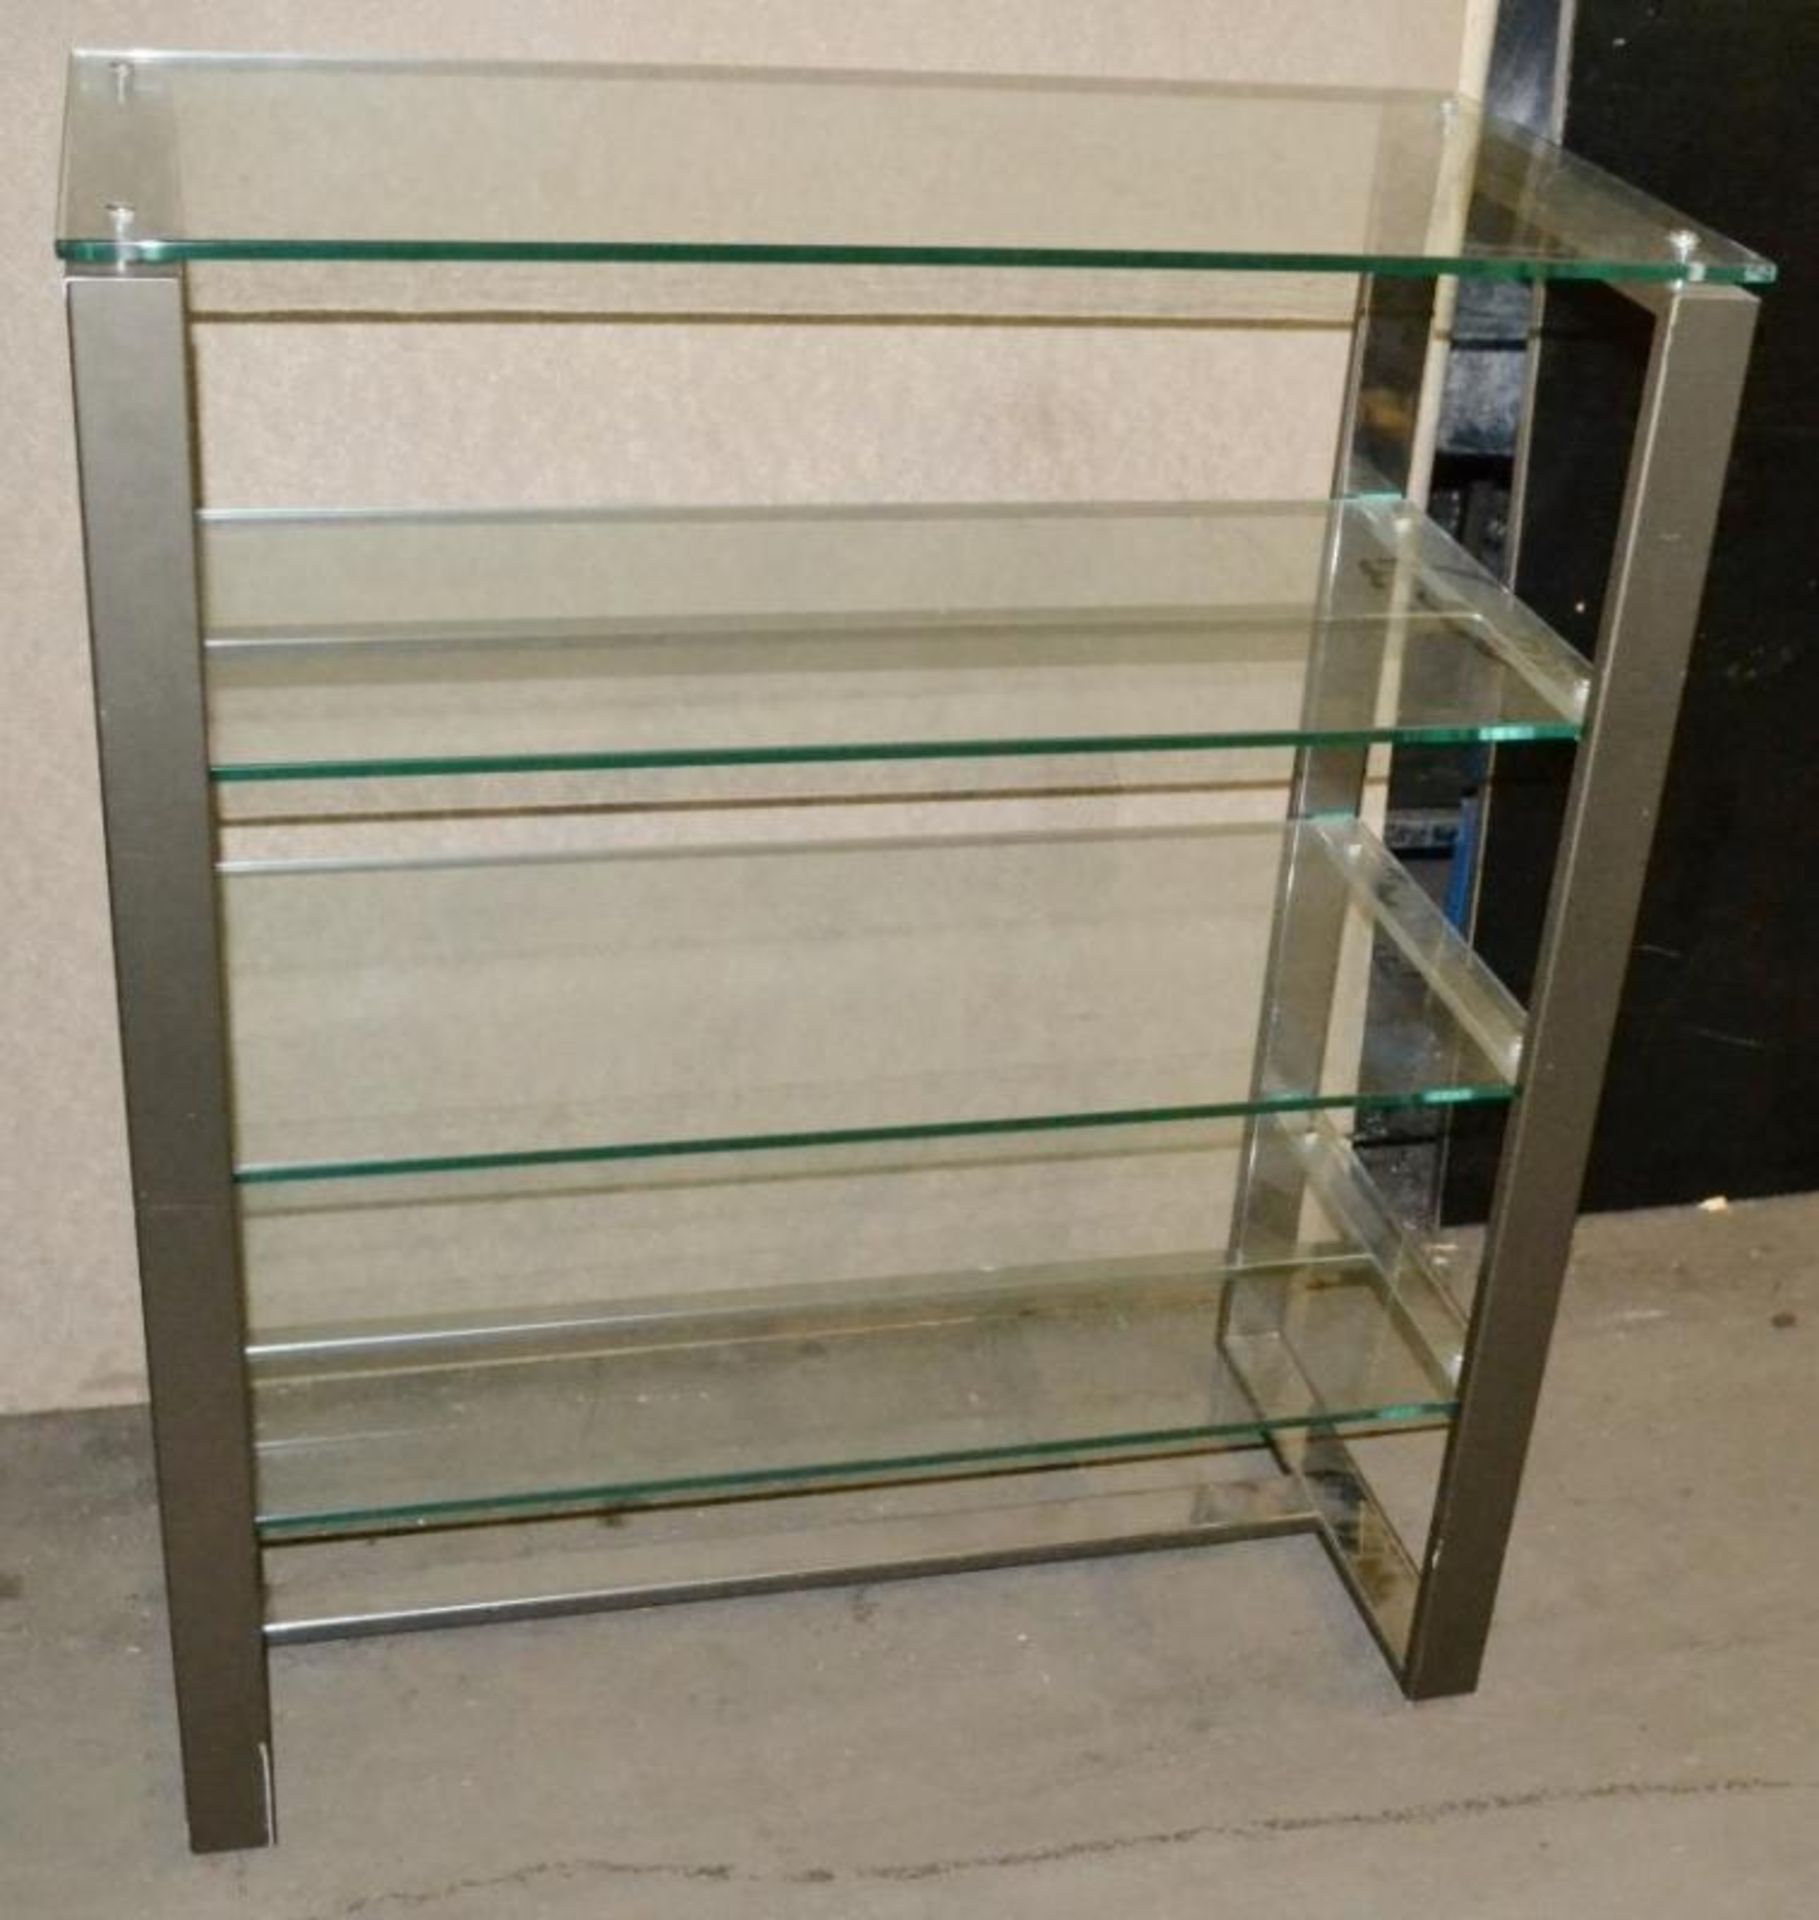 4 x 4-Shelf Glass Retail Display Units With Sturdy Metal Frames - Ex-Display, Recently Removed From